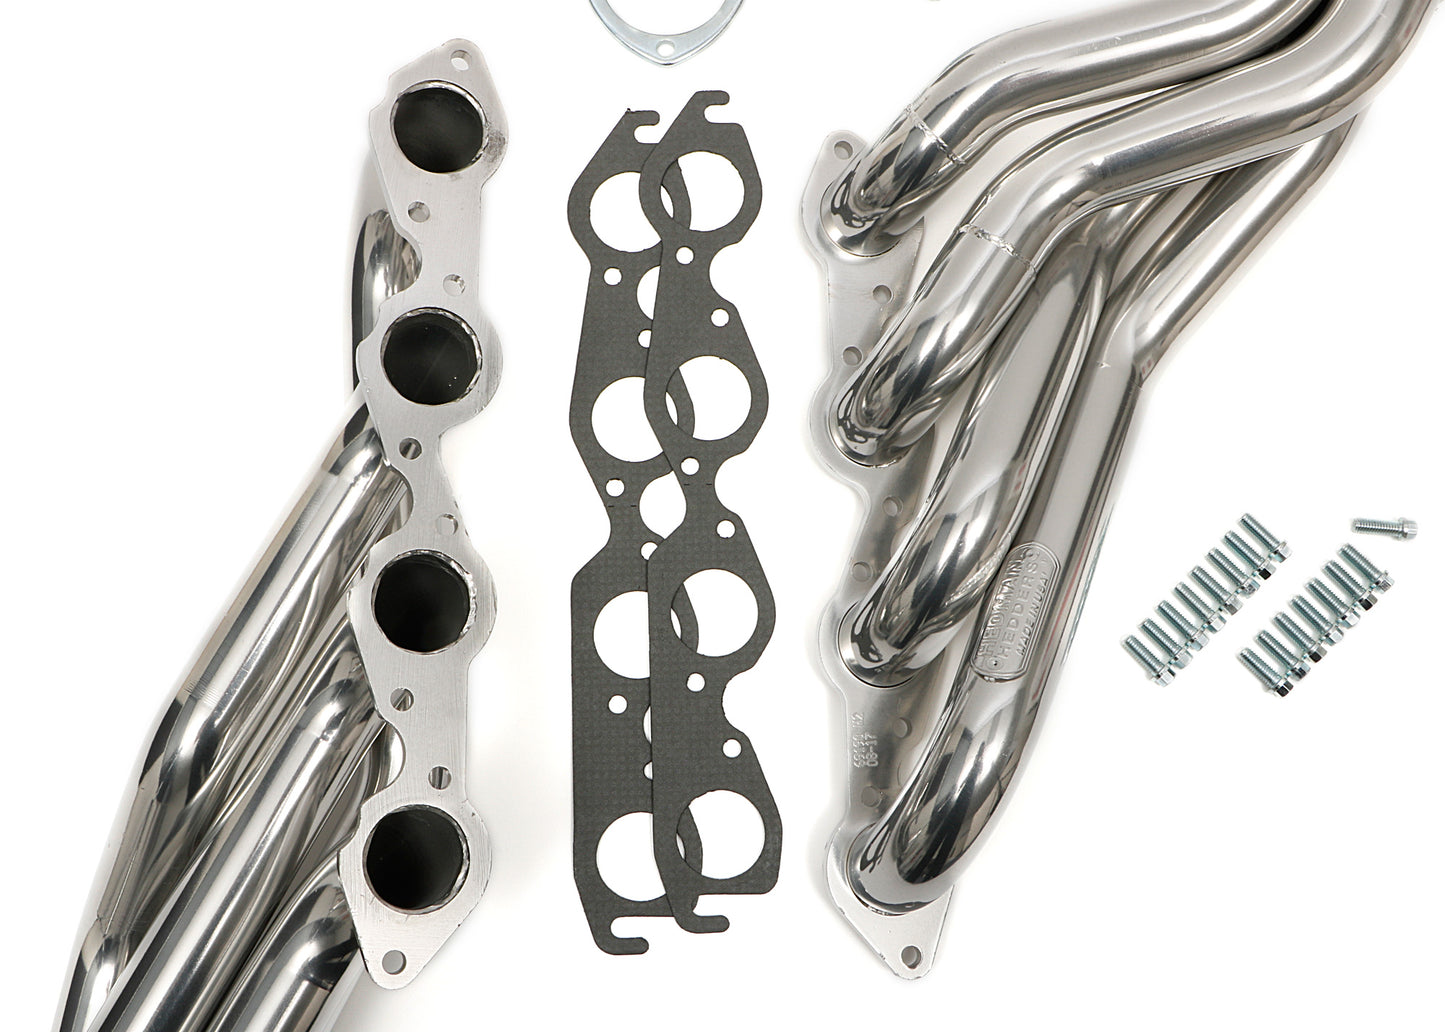 Hedman Hedders 67-87 C10/C20 TRUCKS AND SUVS WITH BB CHEVY; STANDARD-DUTY HTC SILVER CERAMIC COATED HEADERS; 2 IN. TUBE DIA.; 3 IN. COLL.; MID-LENGTH DESIGN 69196